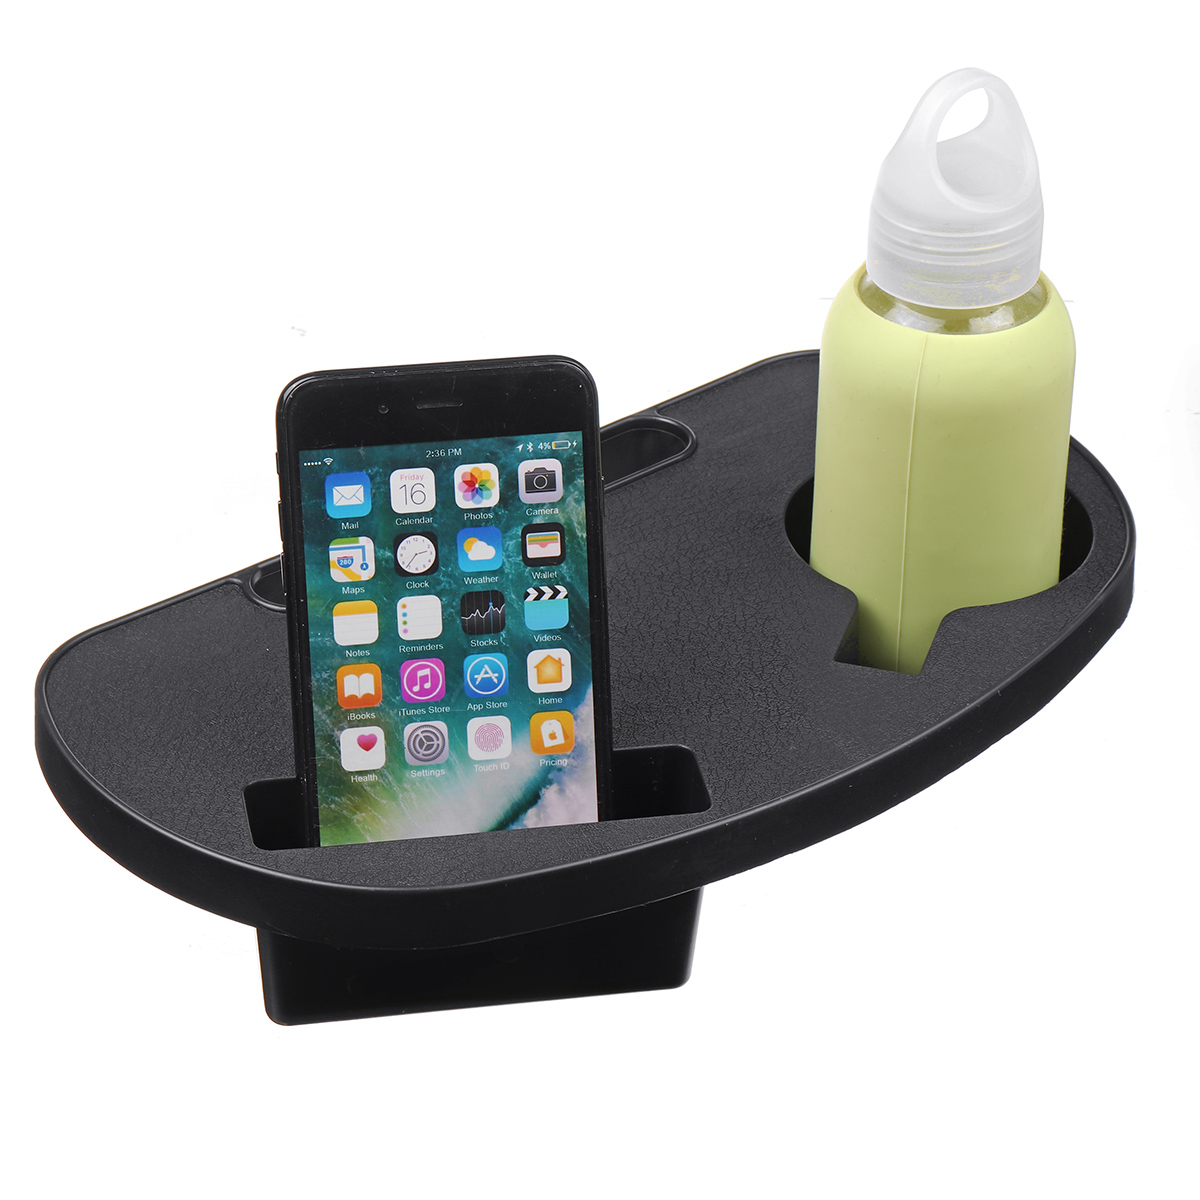 Folding-Chair-Table-Side-Tray-Multi-functional-Drink-Cup-Water-Bottle-Holder-Phone-Rack-1694964-12